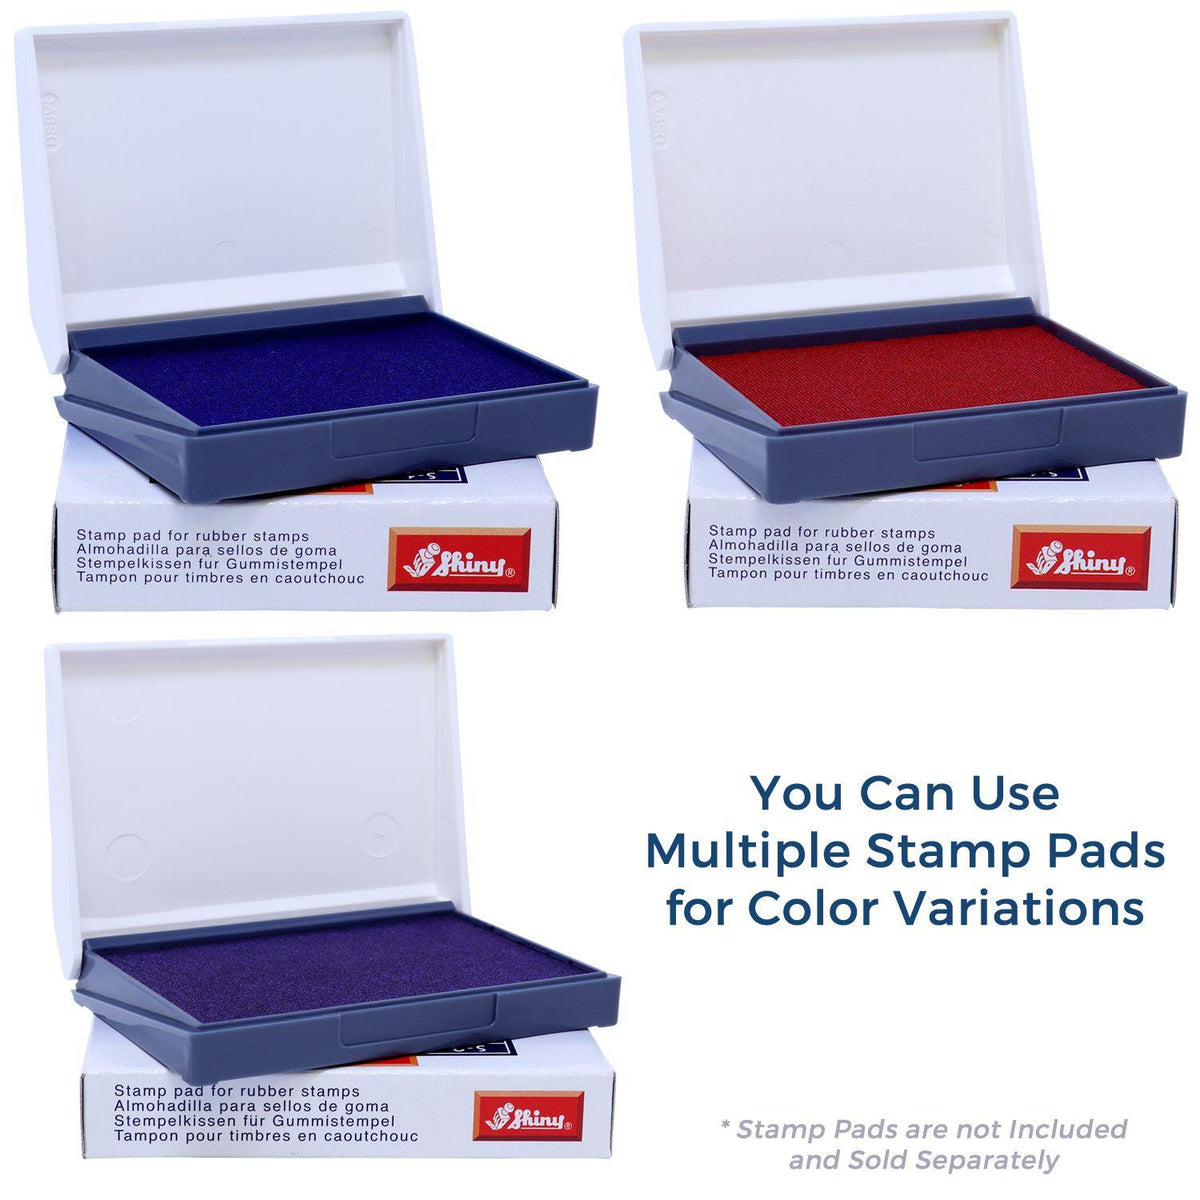 Stamp Pads for Large Economy Mail Rubber Stamp Available